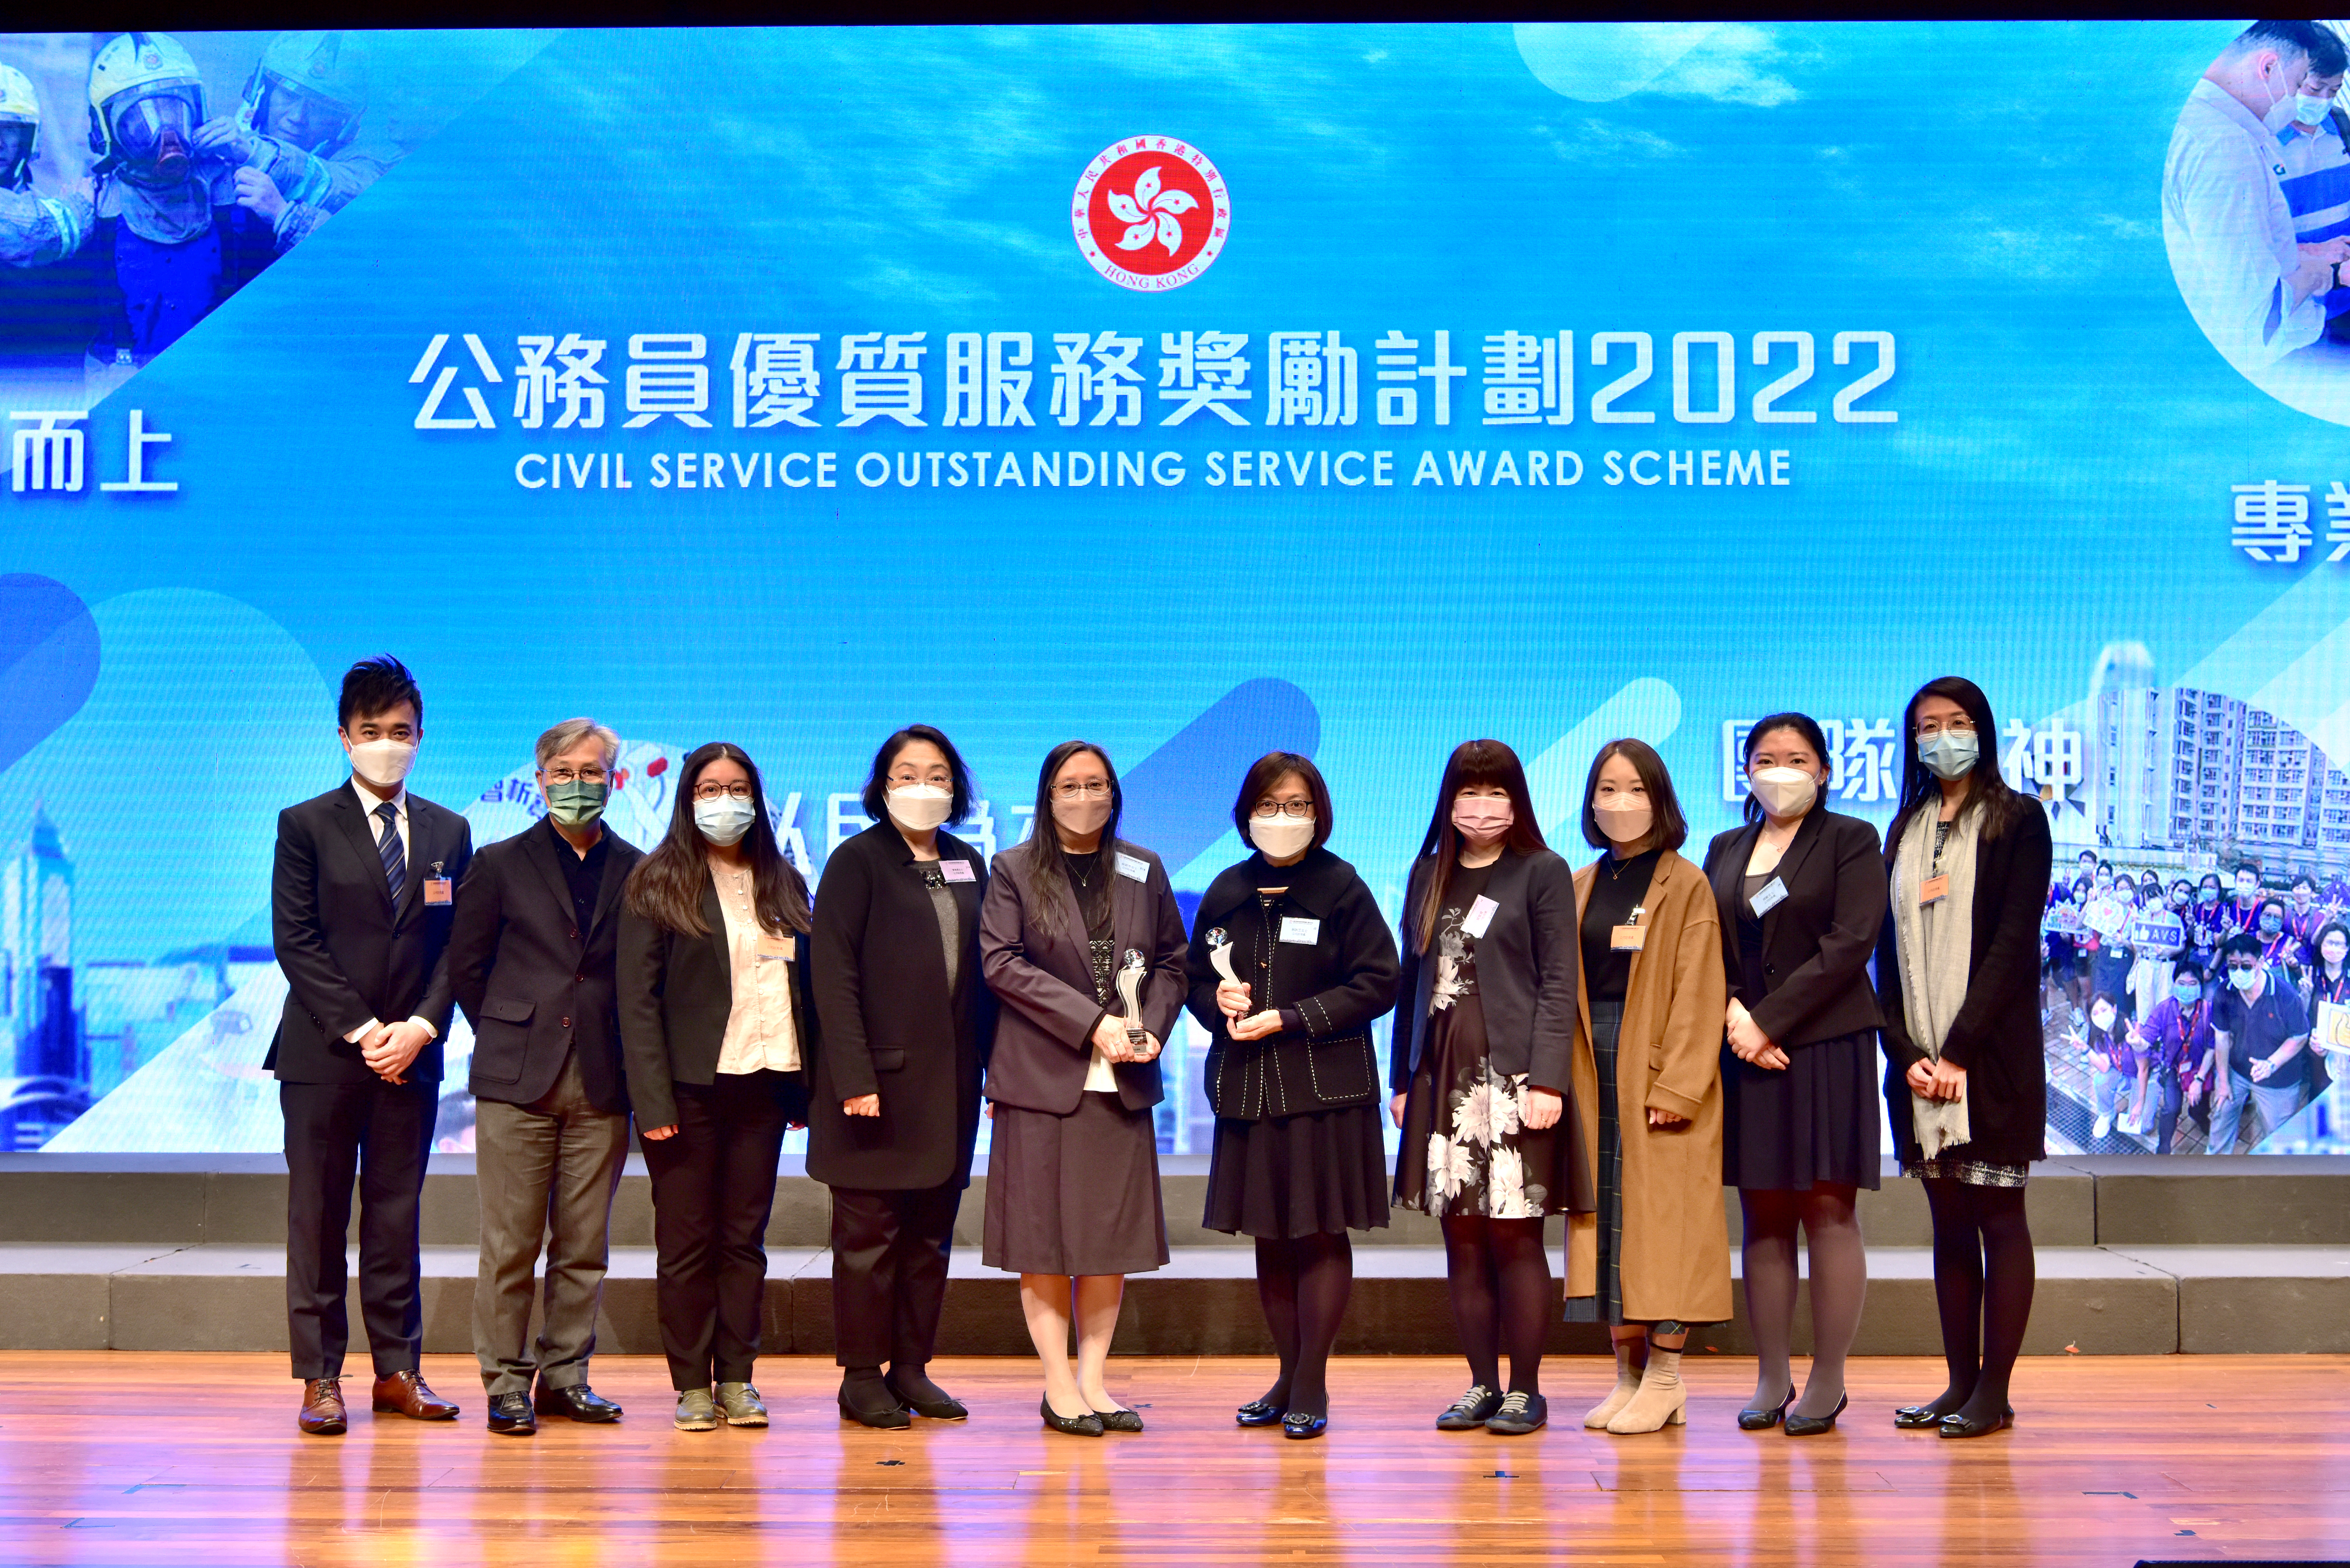 Miss Helen Tang, Registrar of Companies (left fourth), and the Registry’s officers at the Prize Presentation Ceremony.